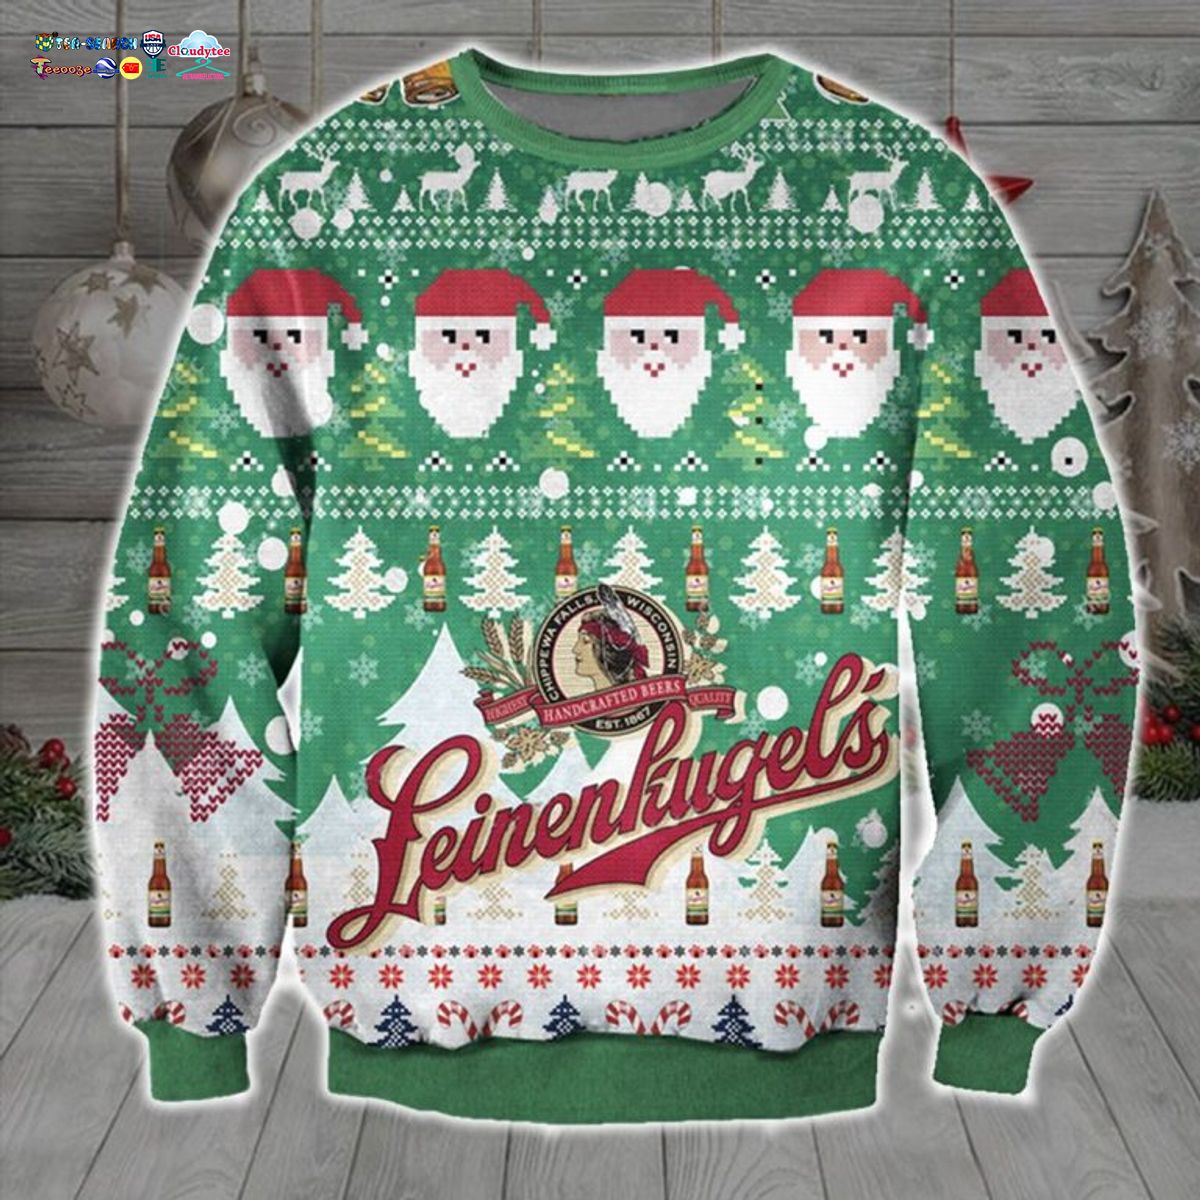 Leinenkugel's Ver 1 Ugly Christmas Sweater - This place looks exotic.